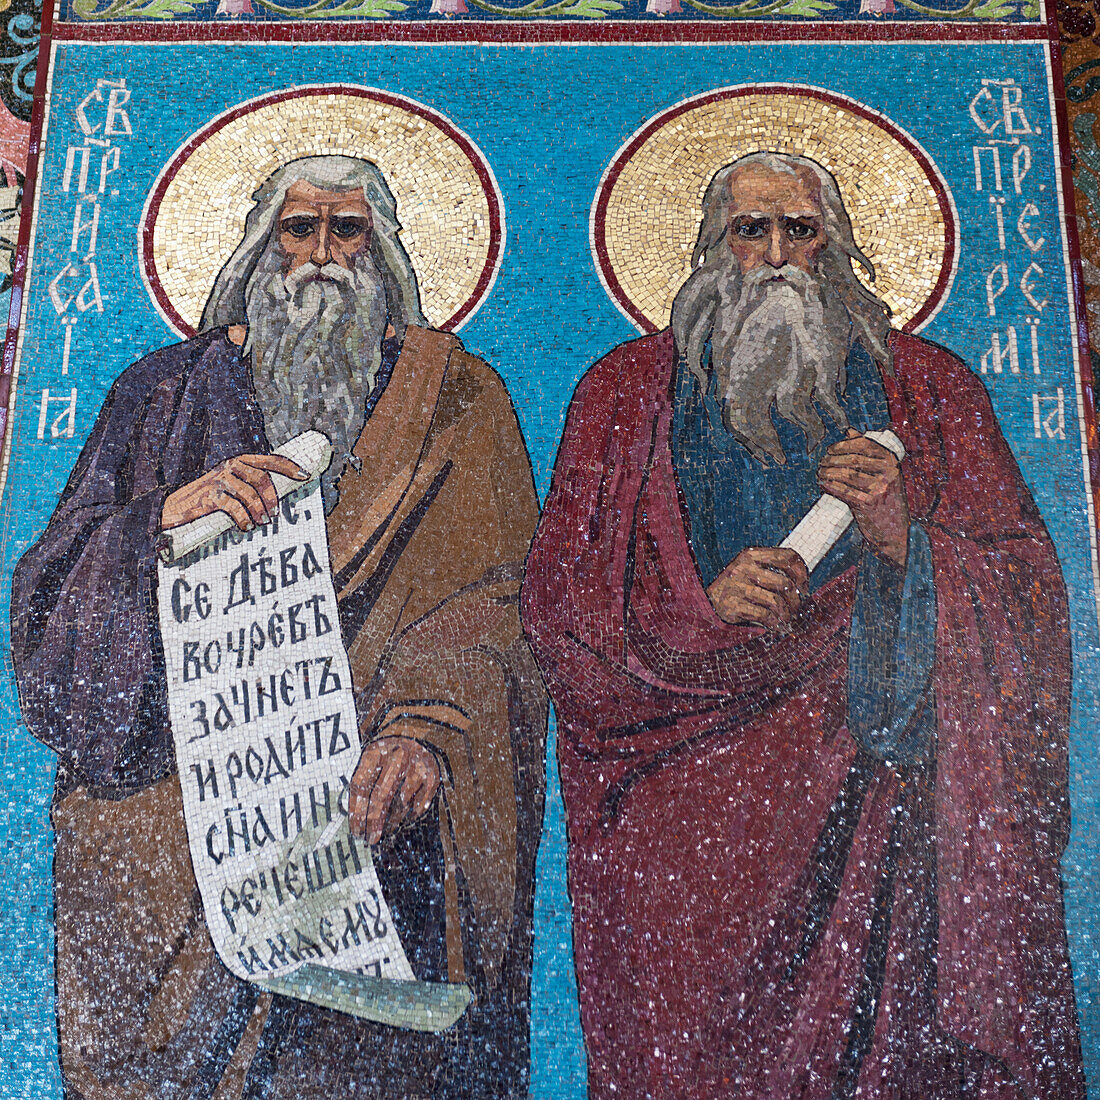 Mosaic Of A Religious Figures In Church Of The Savior On Spilled Blood; St. Petersburg Russia